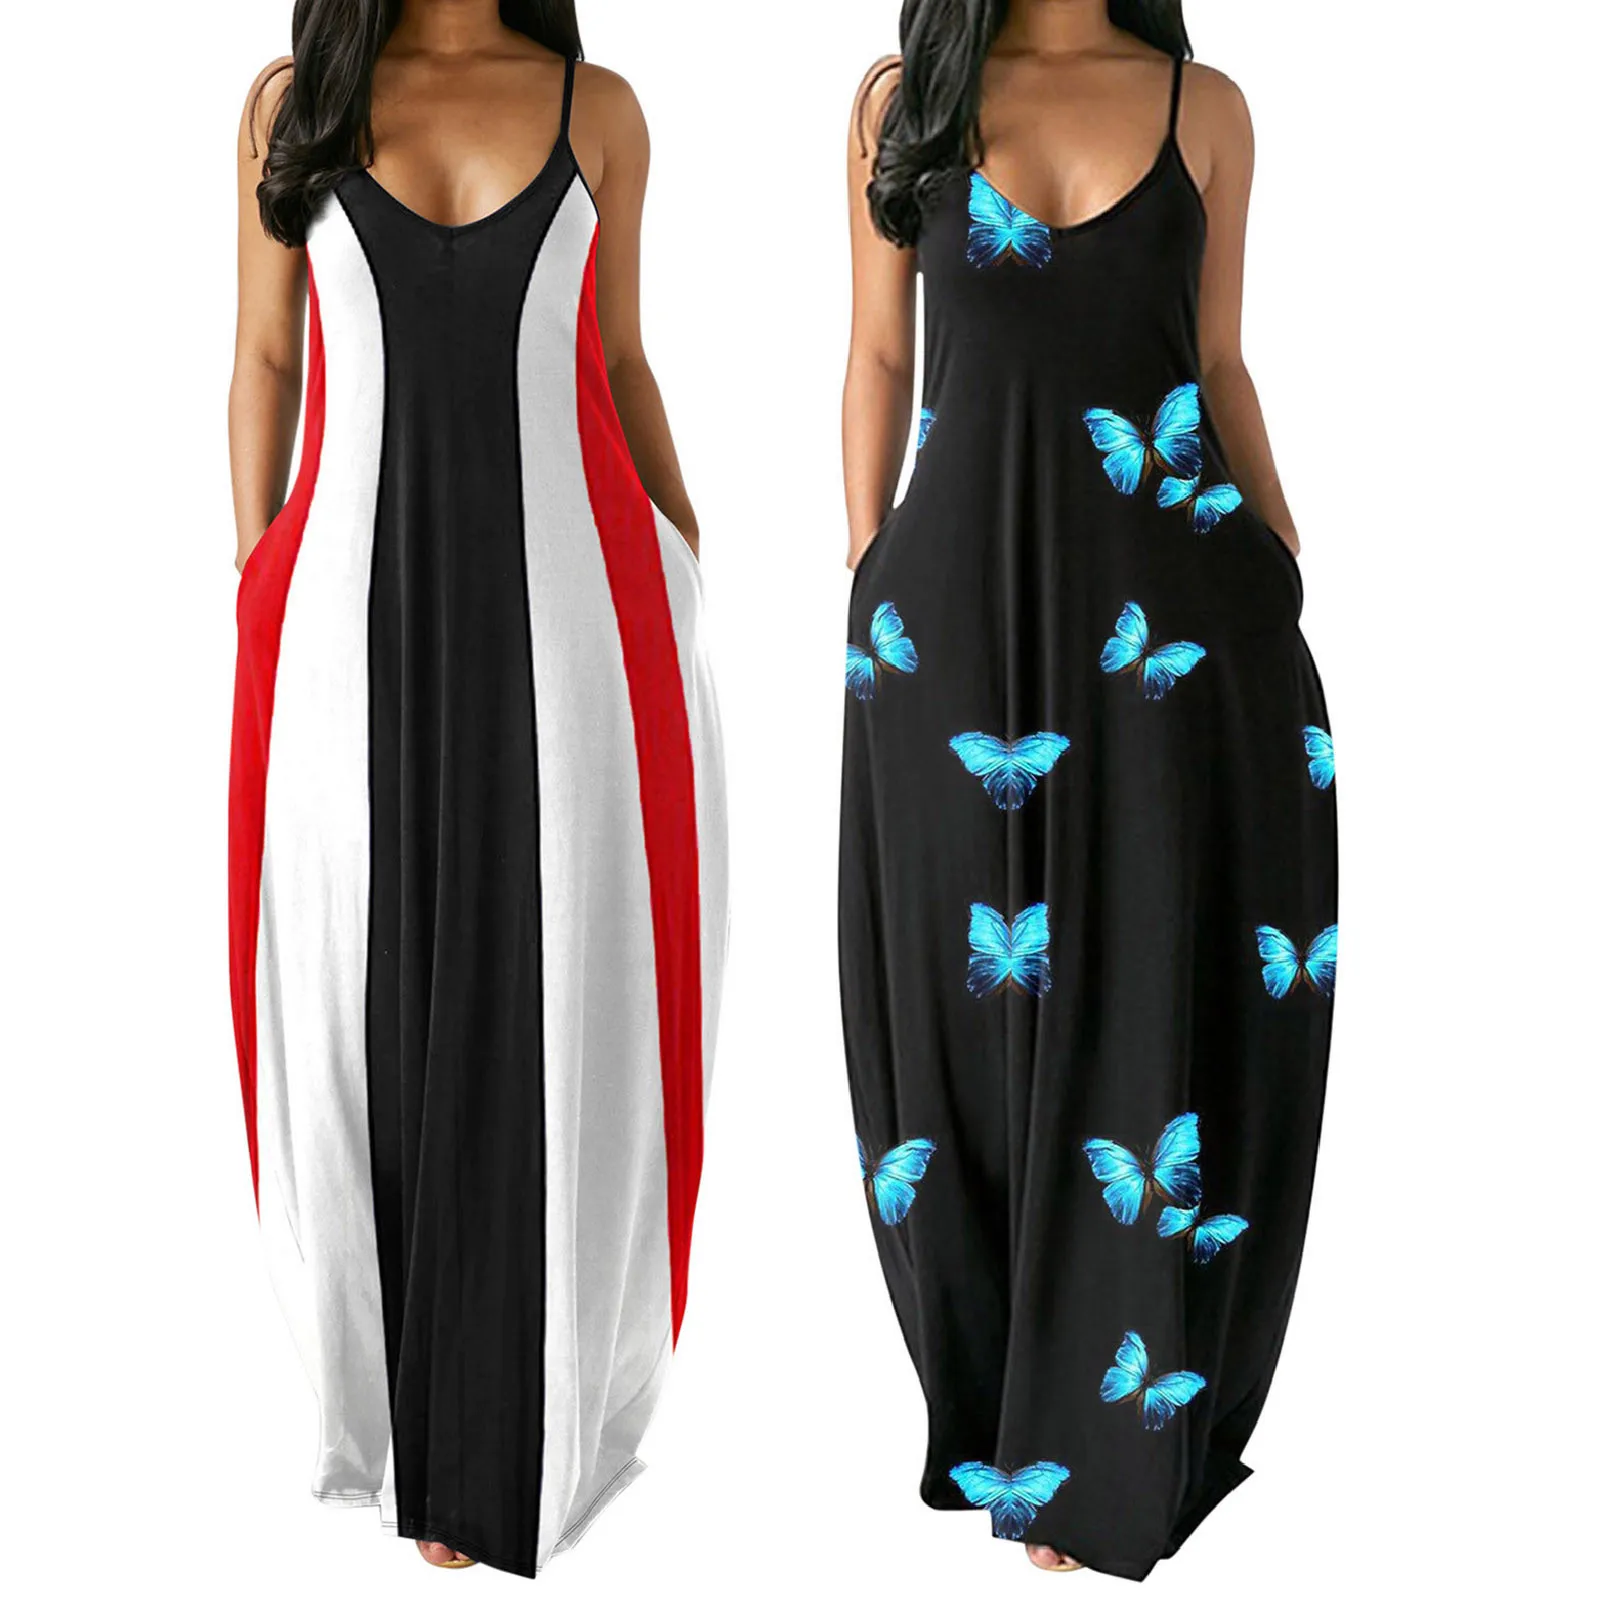 Women Plus Size Summer Sexy V-Neck Butterfly Print Sleeveless Pullover Long Dresses Off Shoulder Beach Holiday Party Wear Robe monsoon dresses